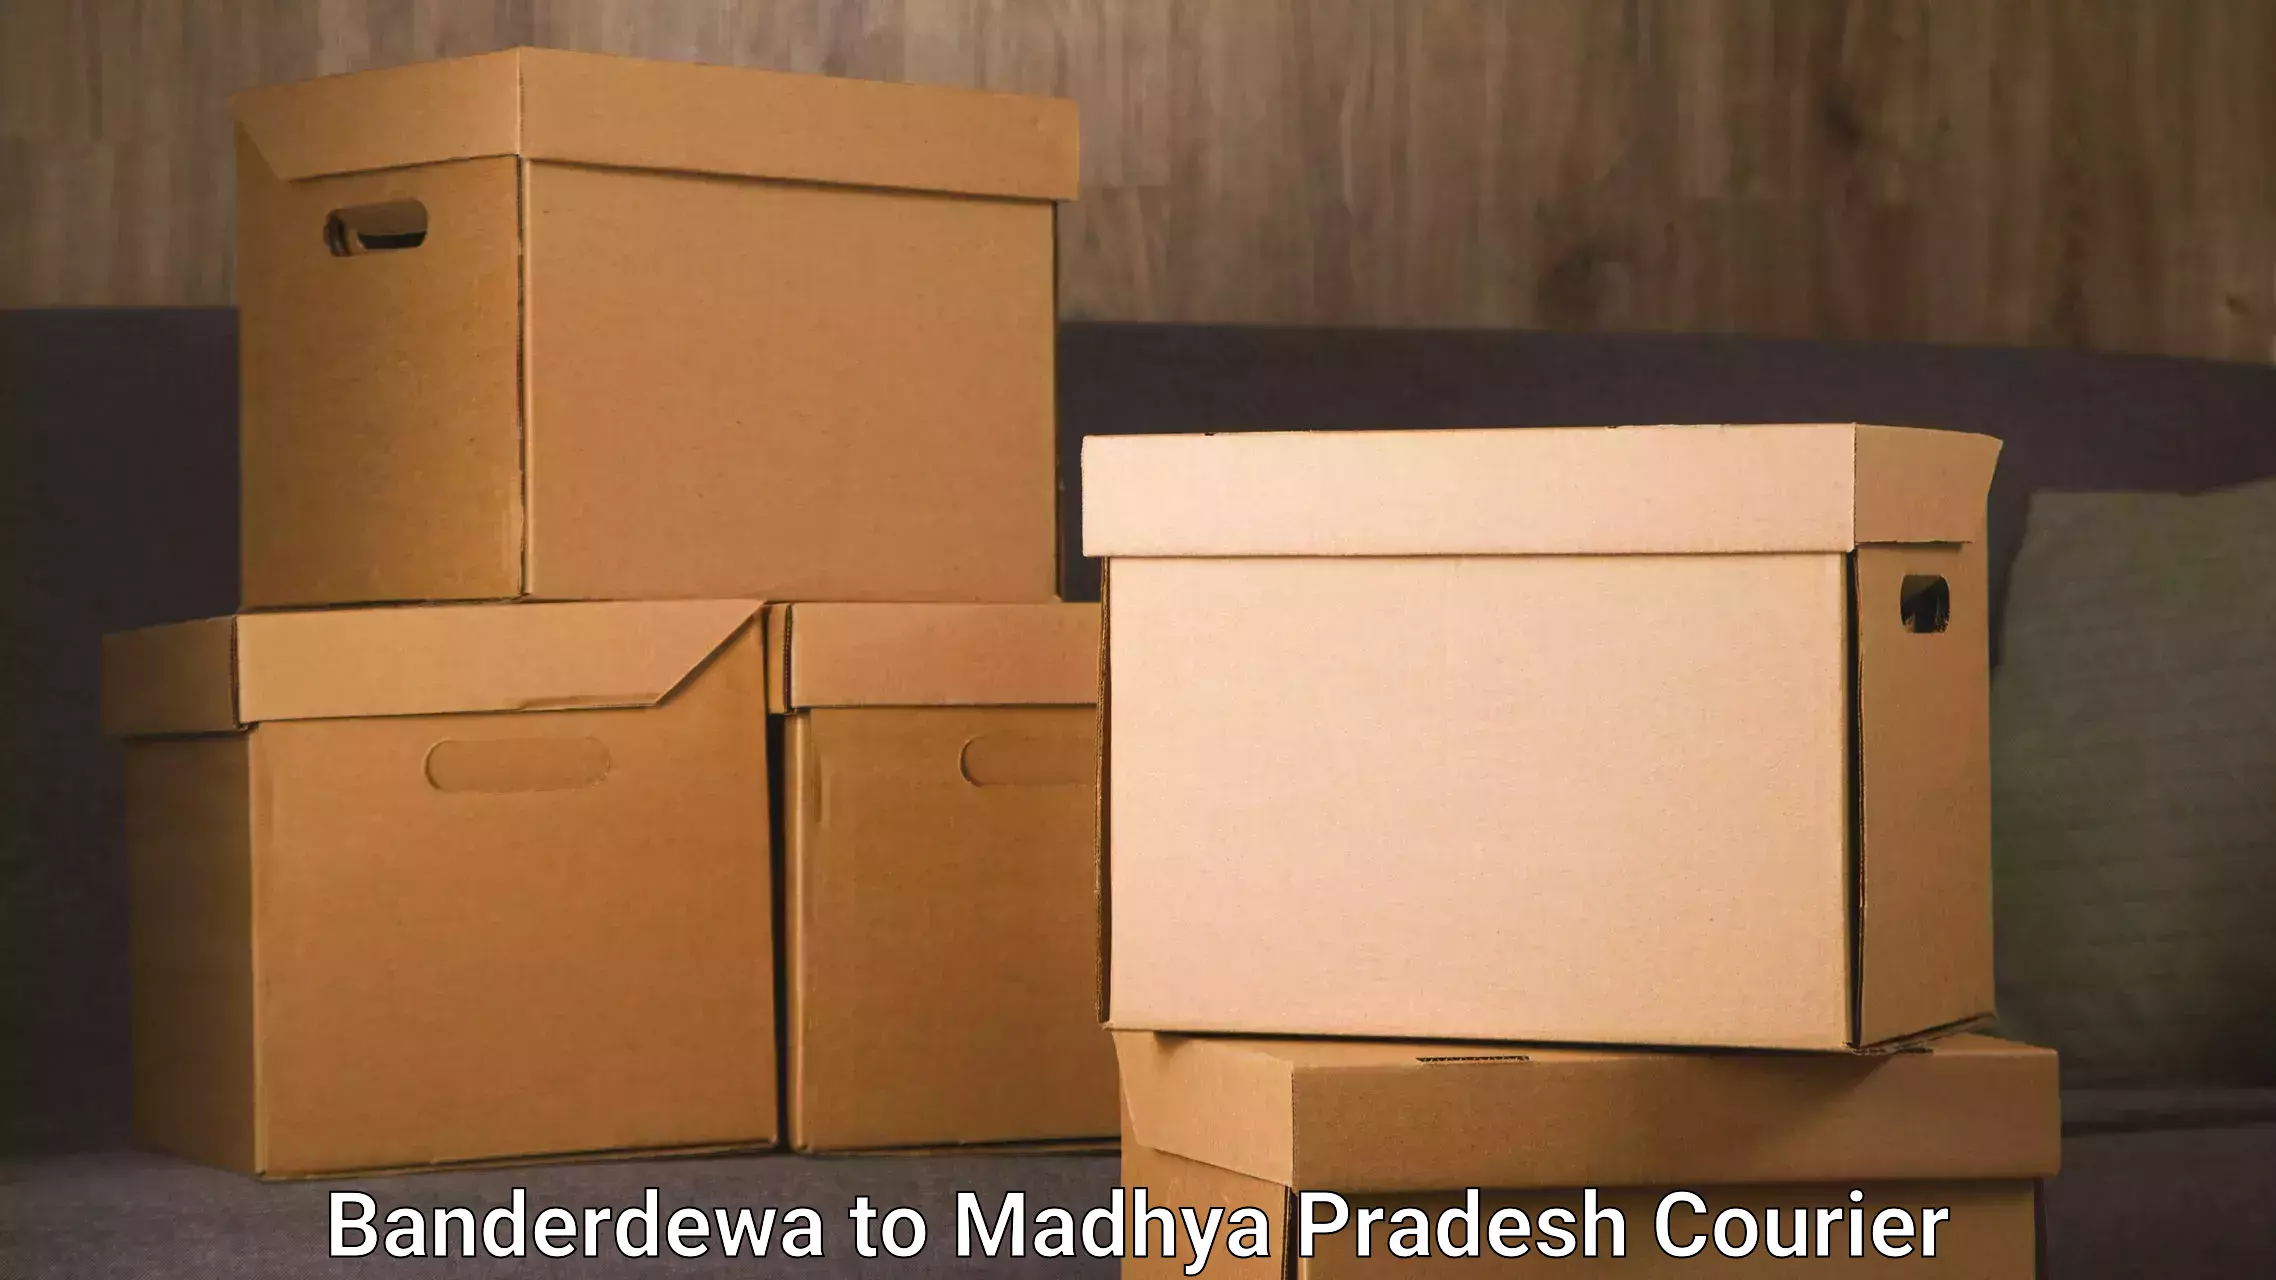 Round-the-clock parcel delivery in Banderdewa to Athner